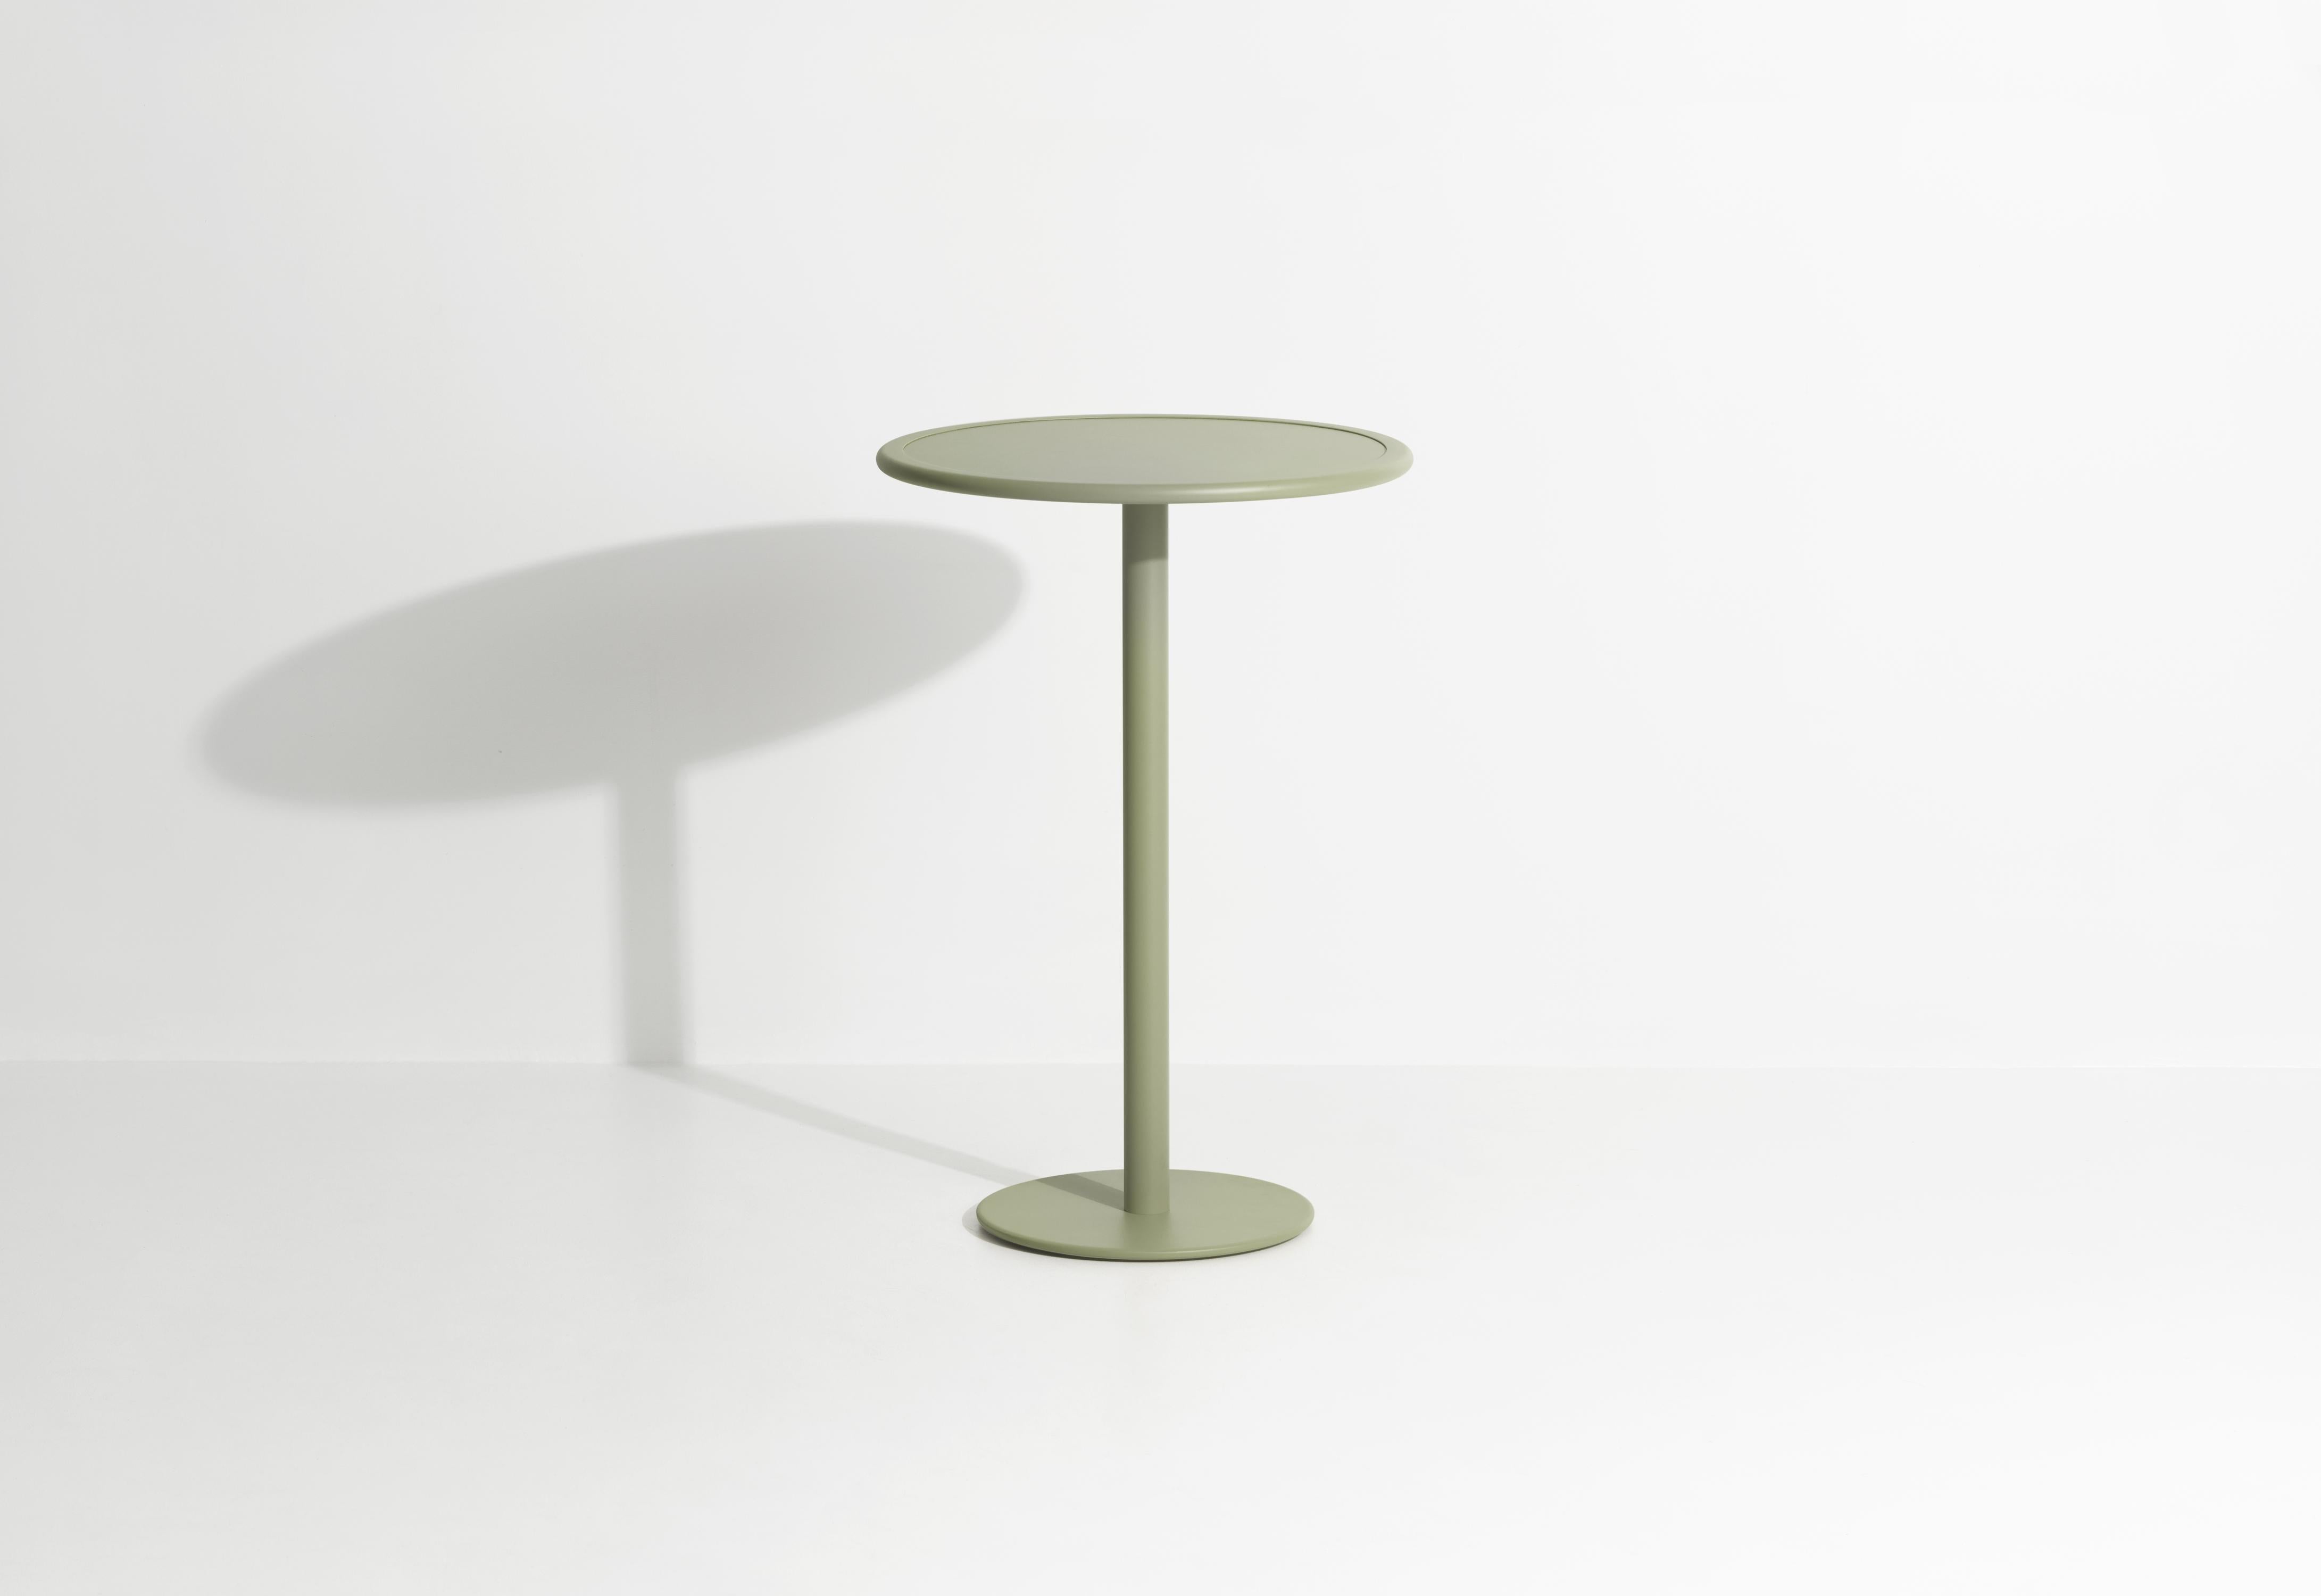 Petite Friture Week-End Round High Table in Jade Green Aluminium by Studio BrichetZiegler, 2017

The week-end collection is a full range of outdoor furniture, in aluminium grained epoxy paint, matt finish, that includes 18 functions and 8 colours